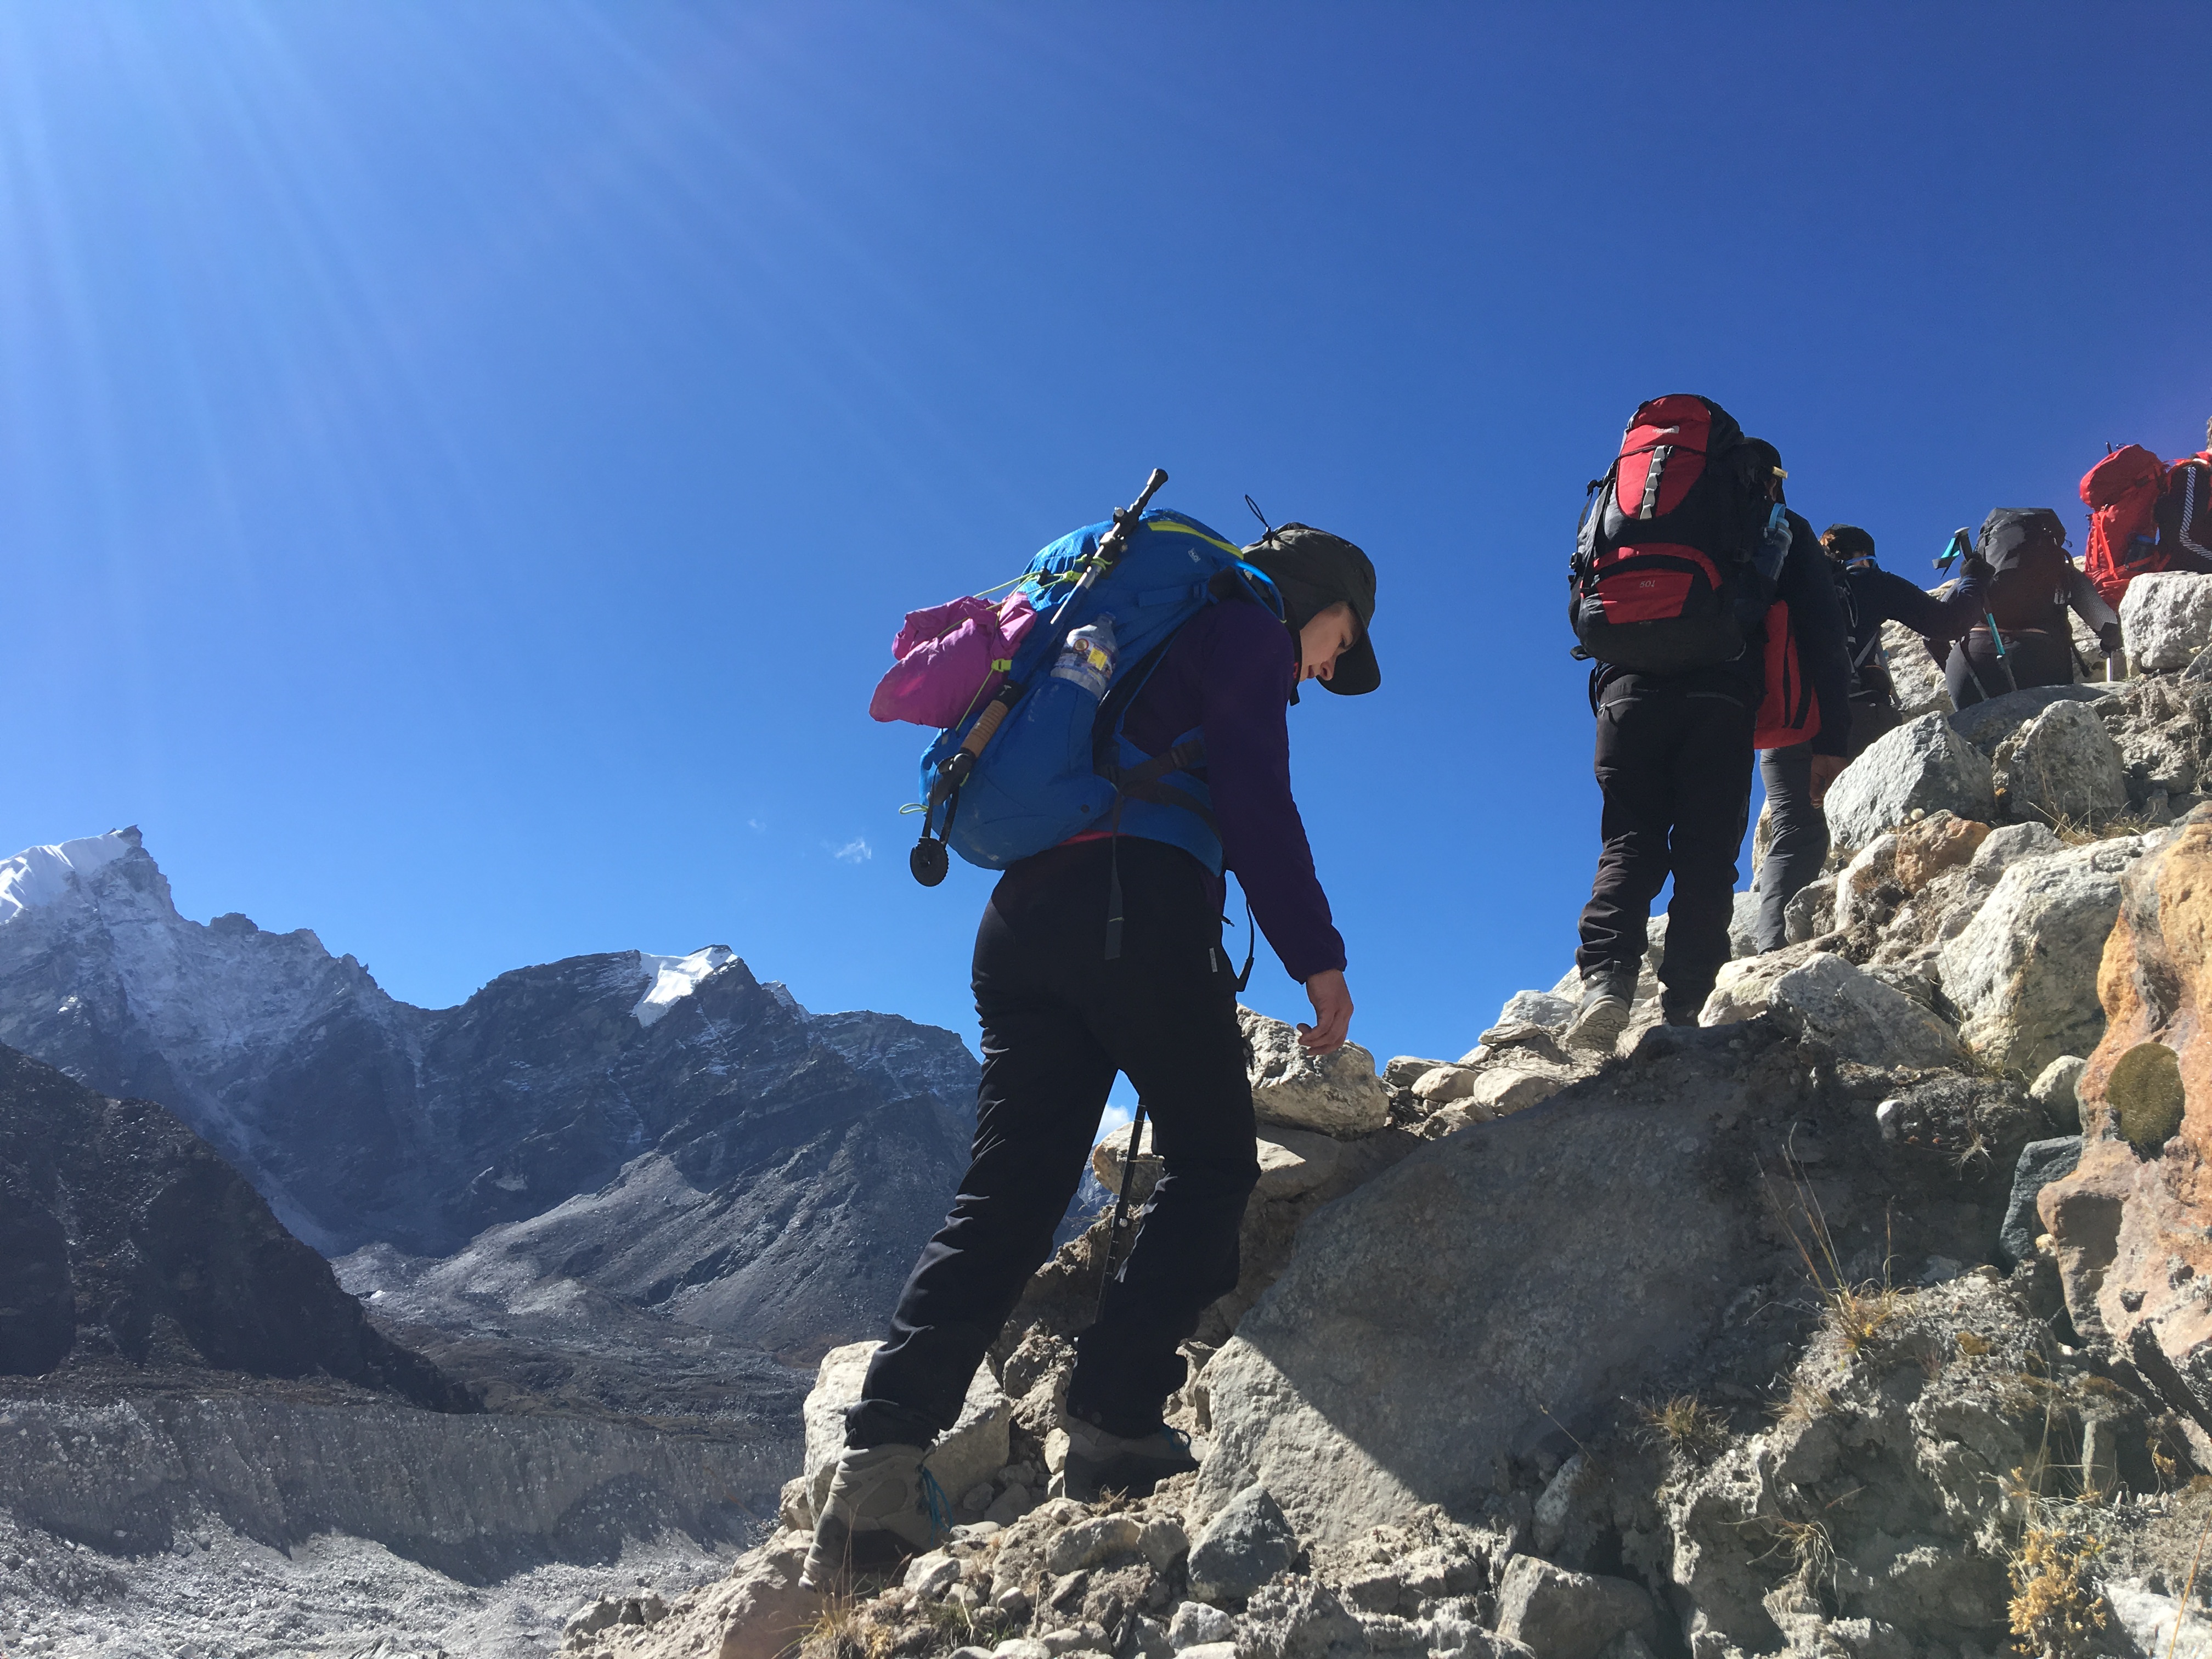 Trekking out of Everest Base Camp in Nepal